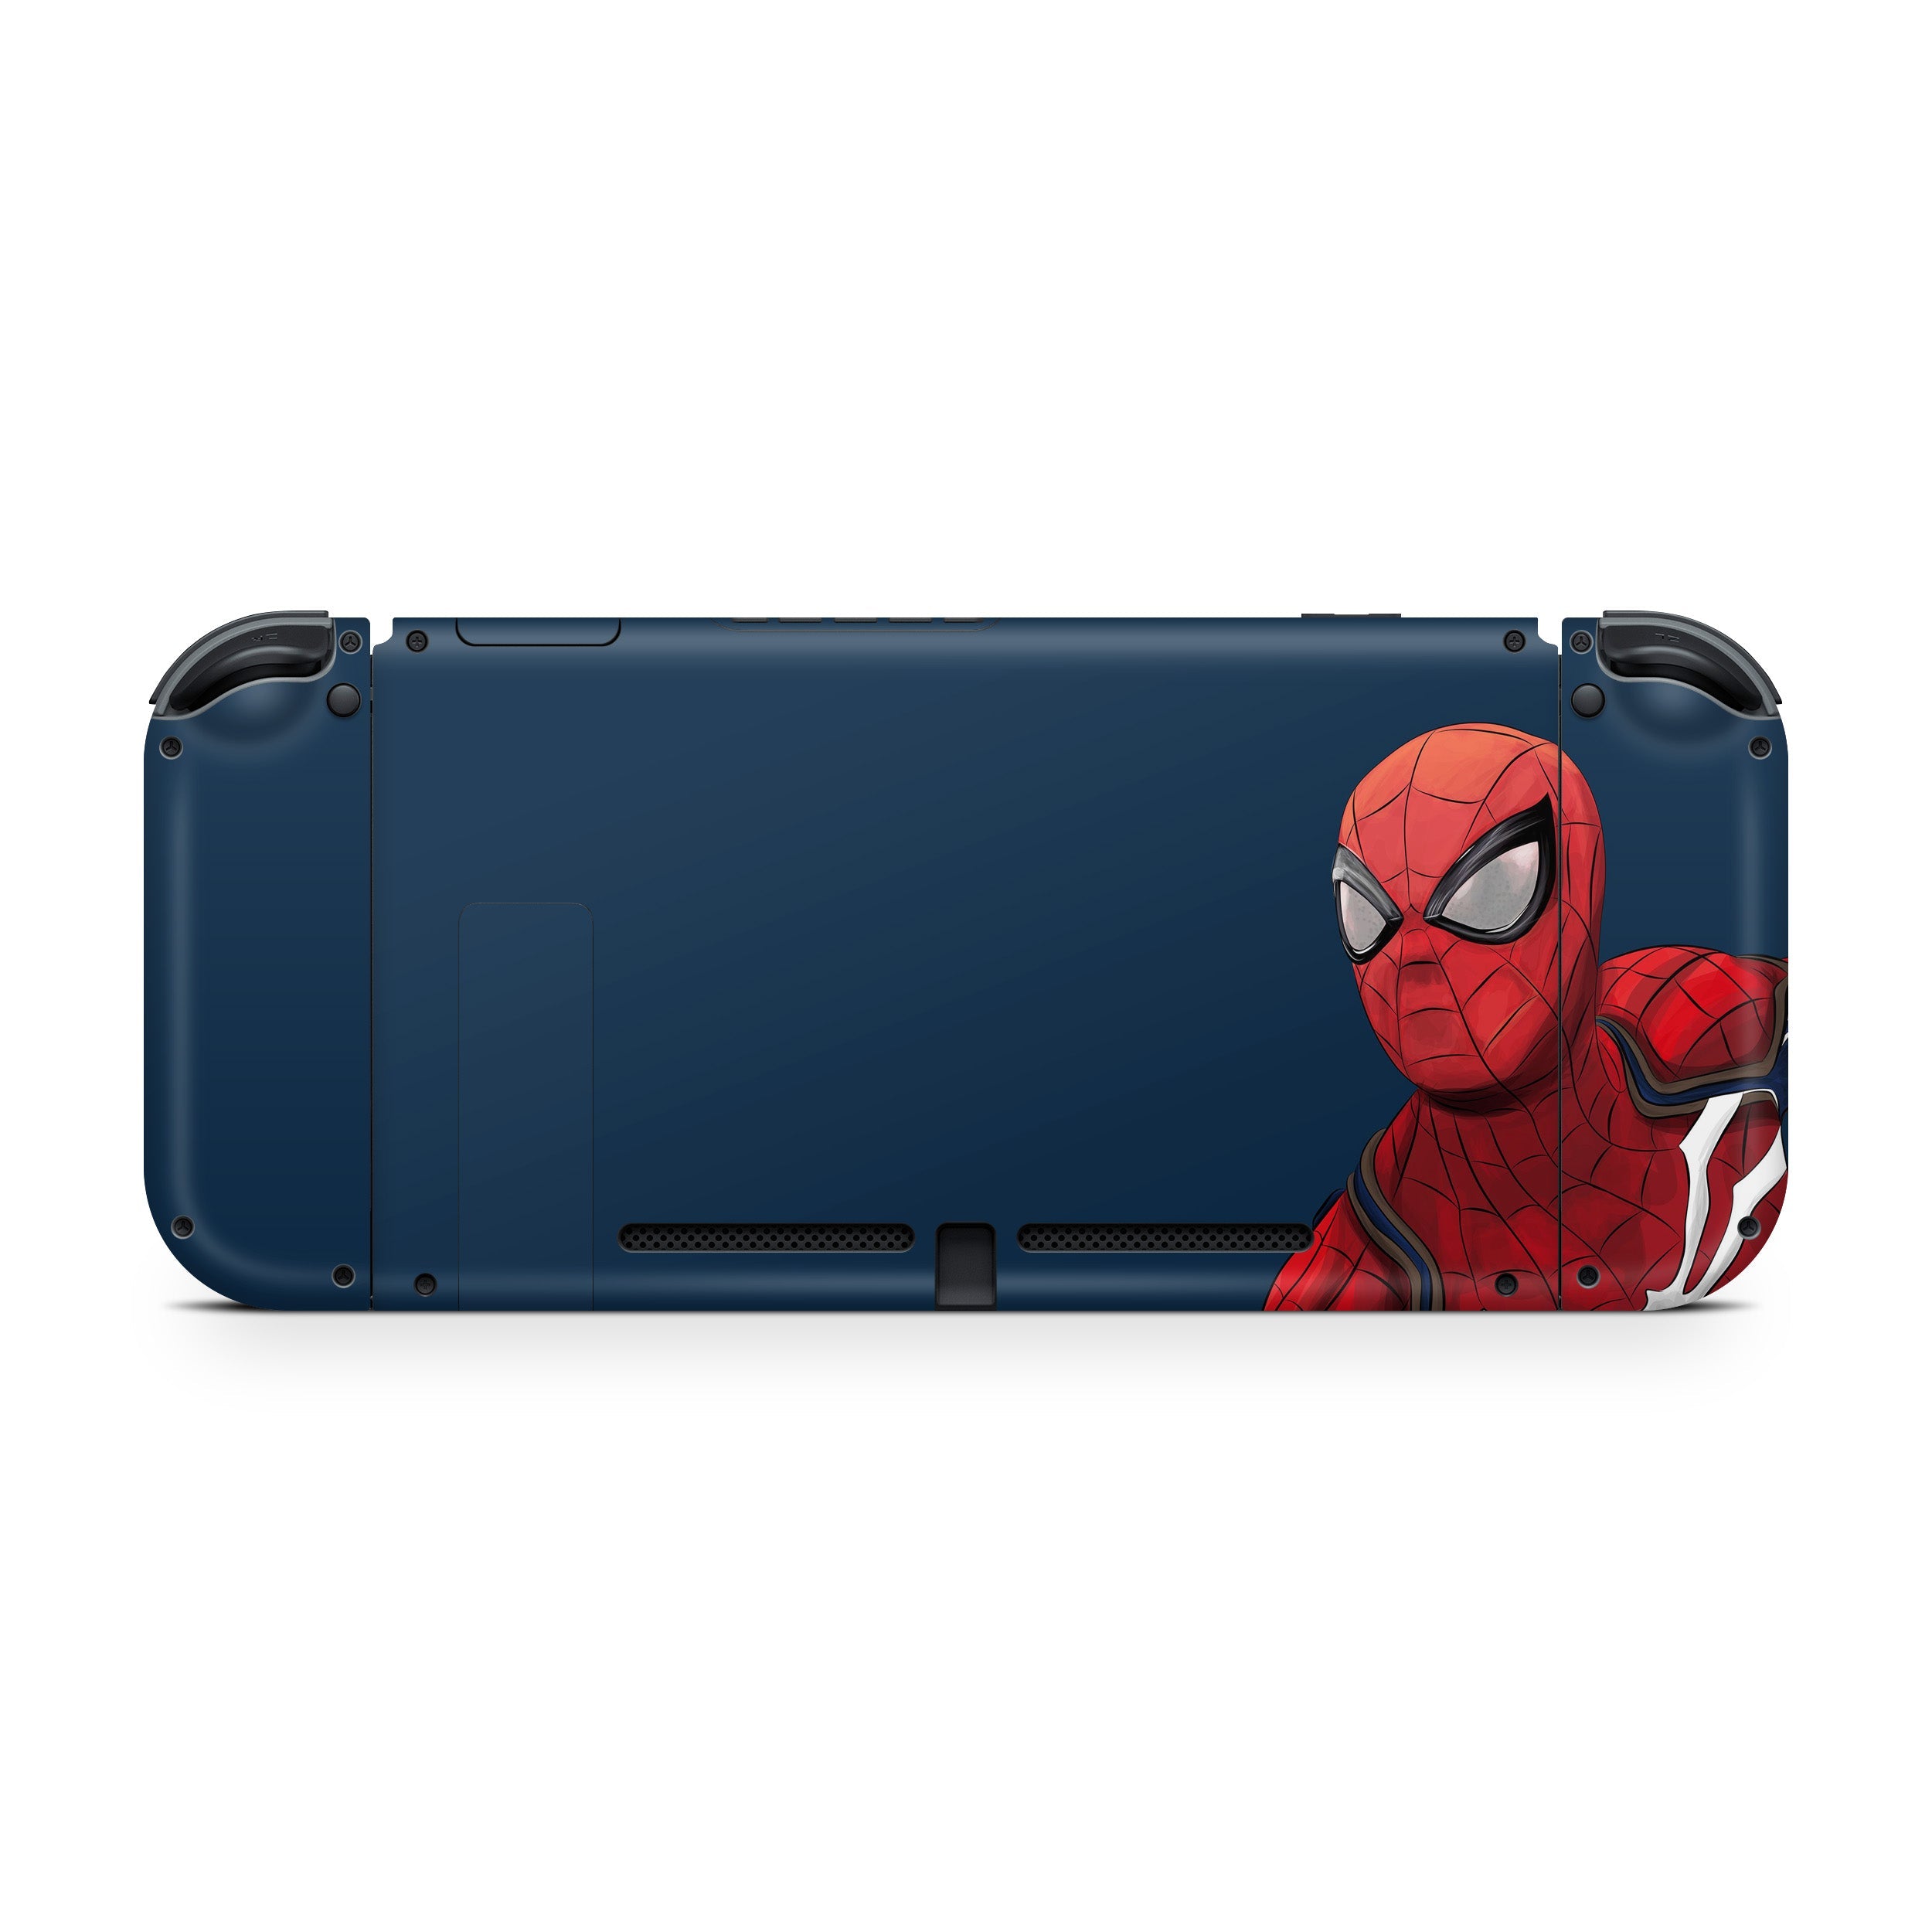 A video game skin featuring a Marvel Spiderman design for the Nintendo Switch.